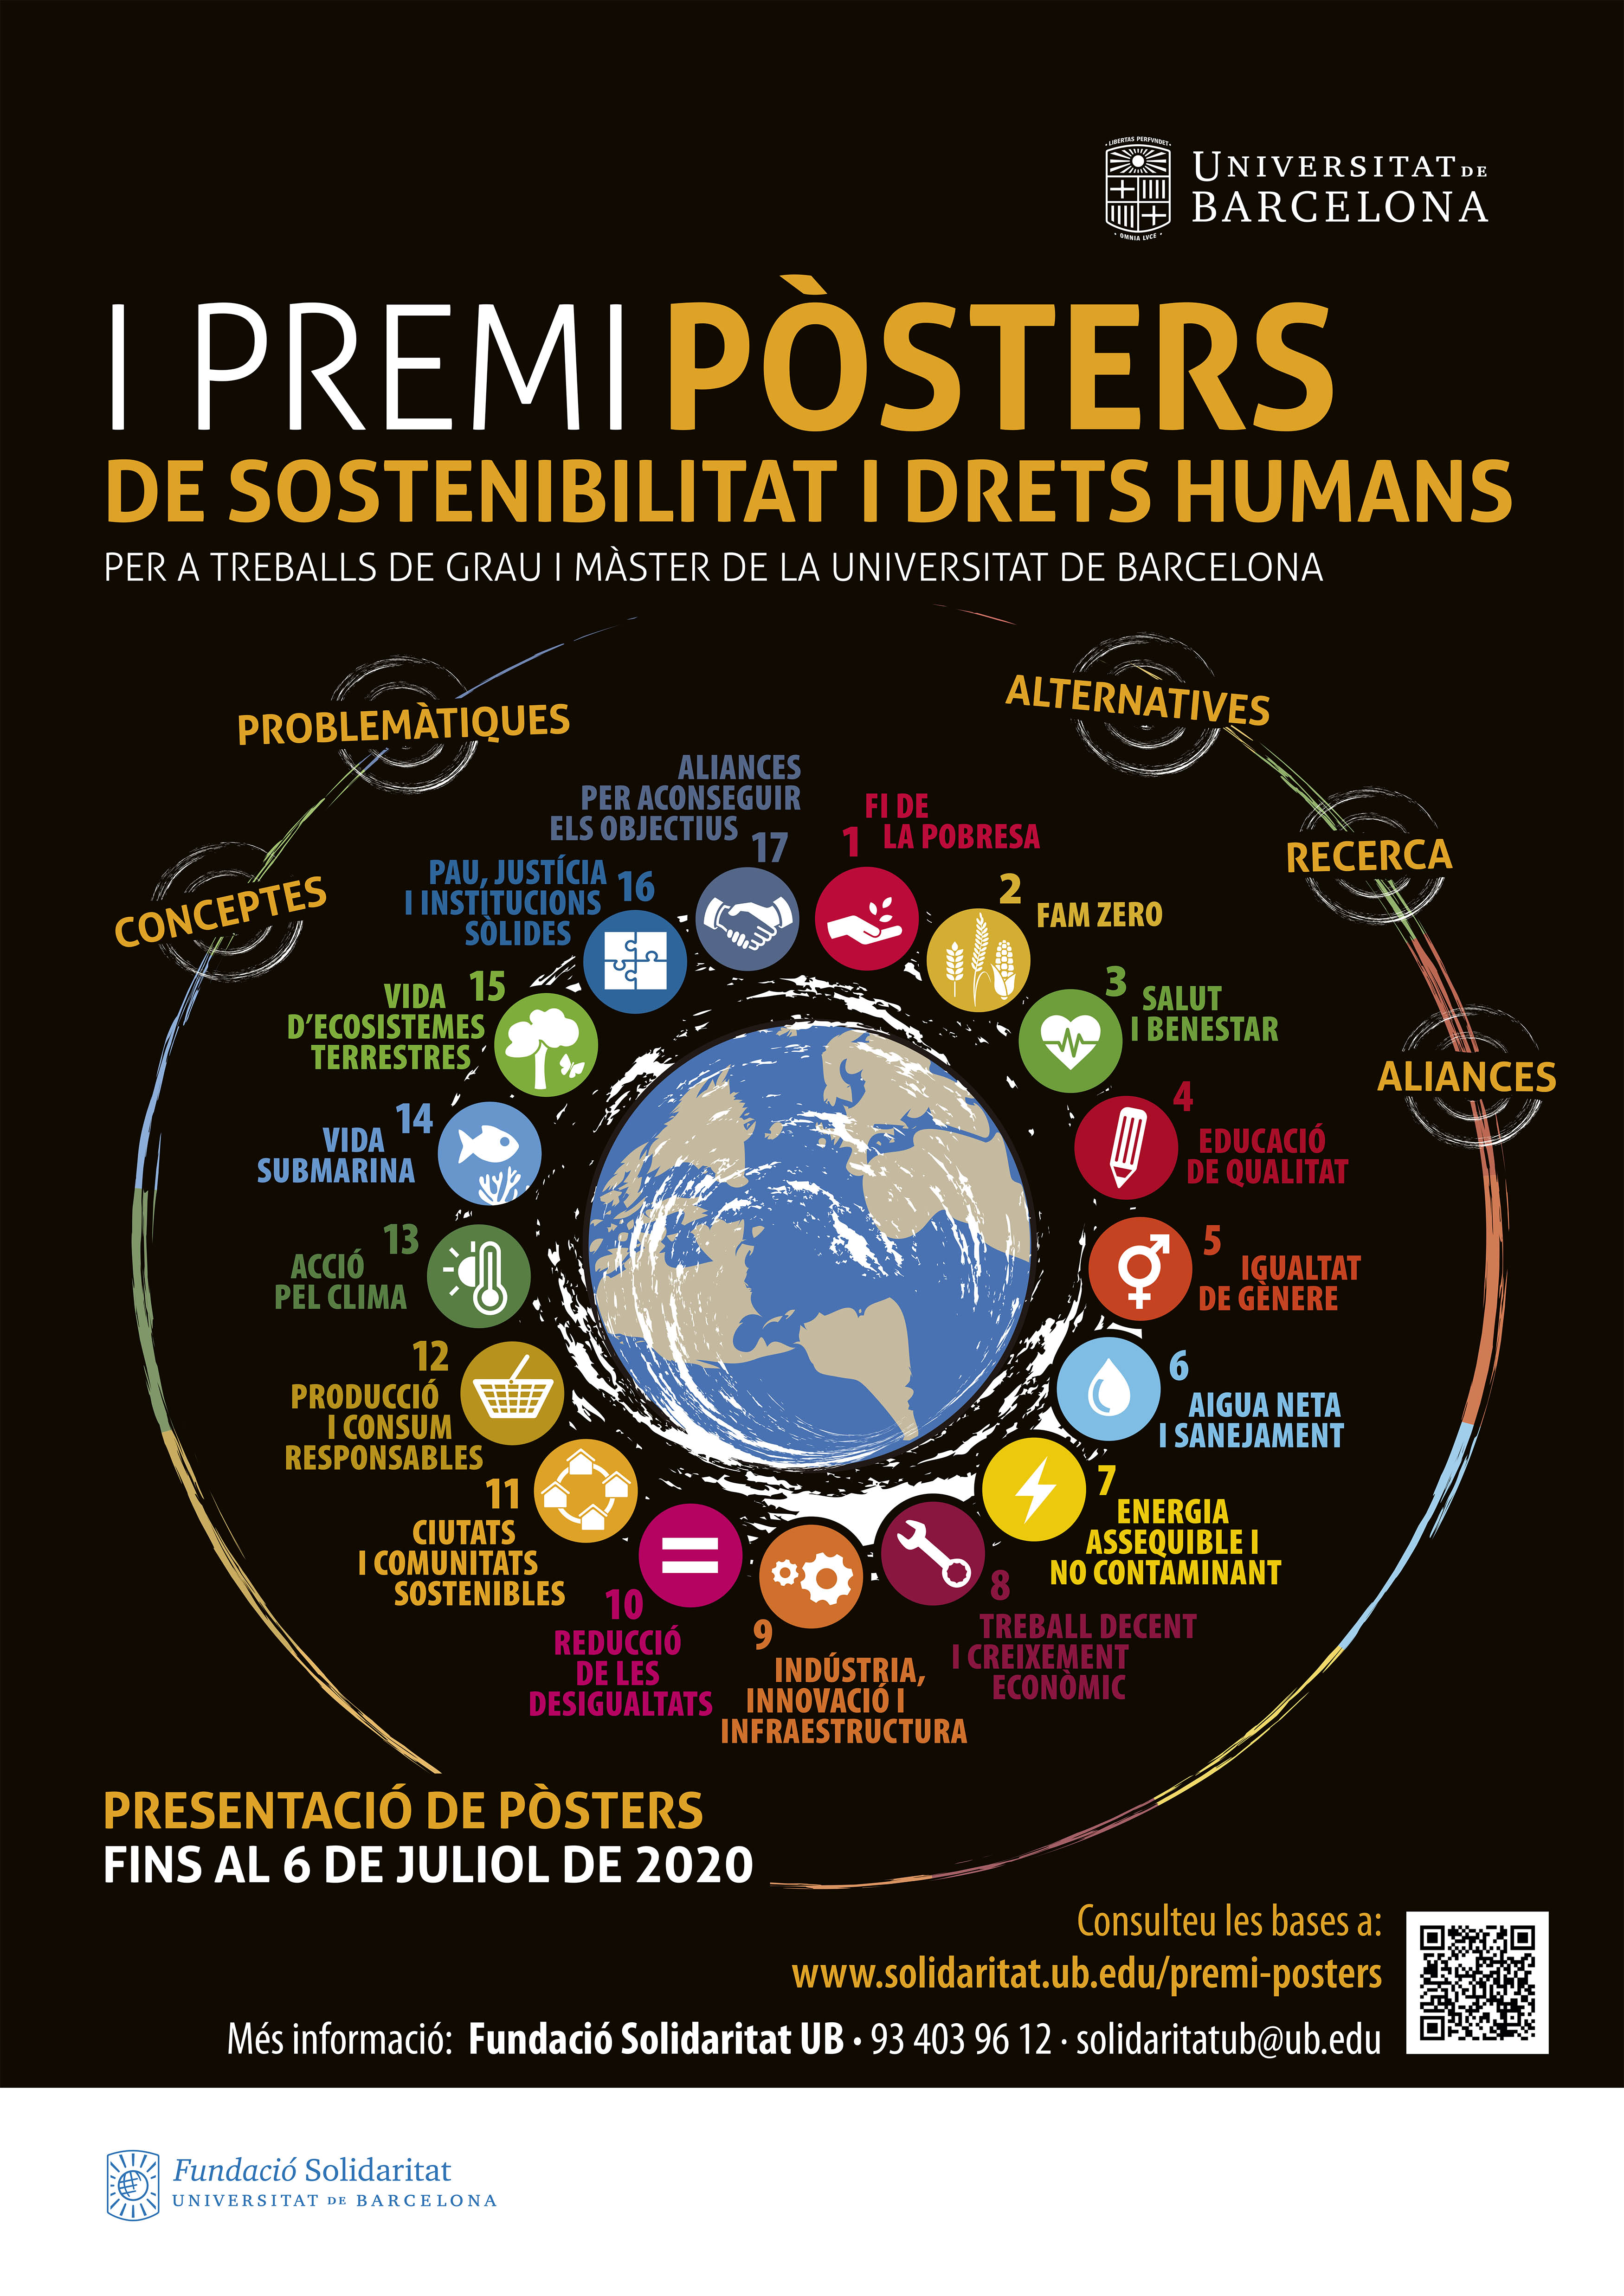 Poster for the 1st Poster Prize on Sustainability and Human Rights.